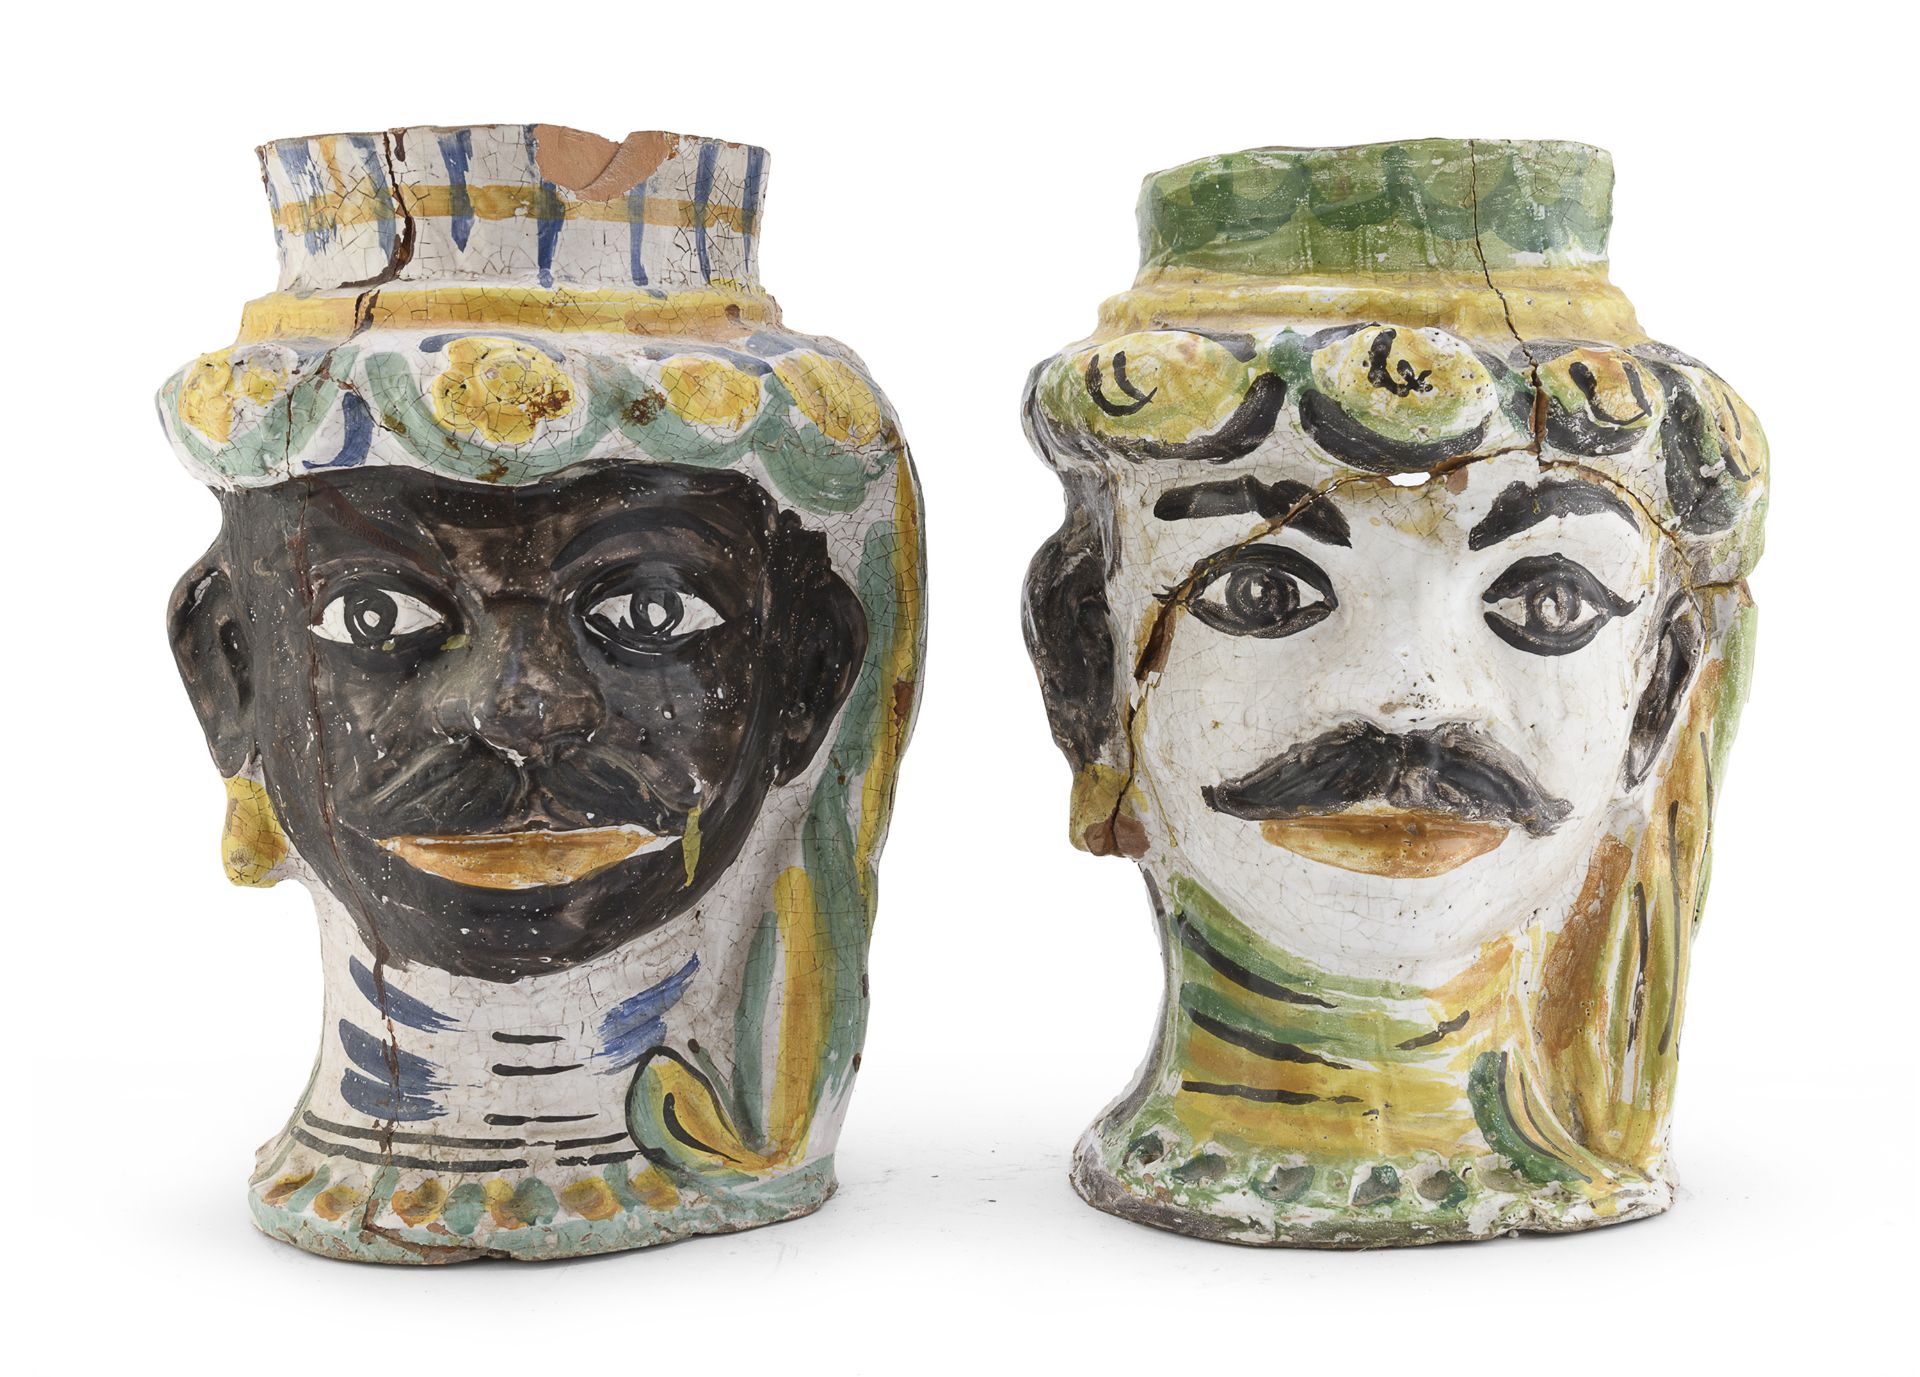 REMAINS OF A PAIR OF MAJOLICA VASES CALTAGIRONE 19TH CENTURY